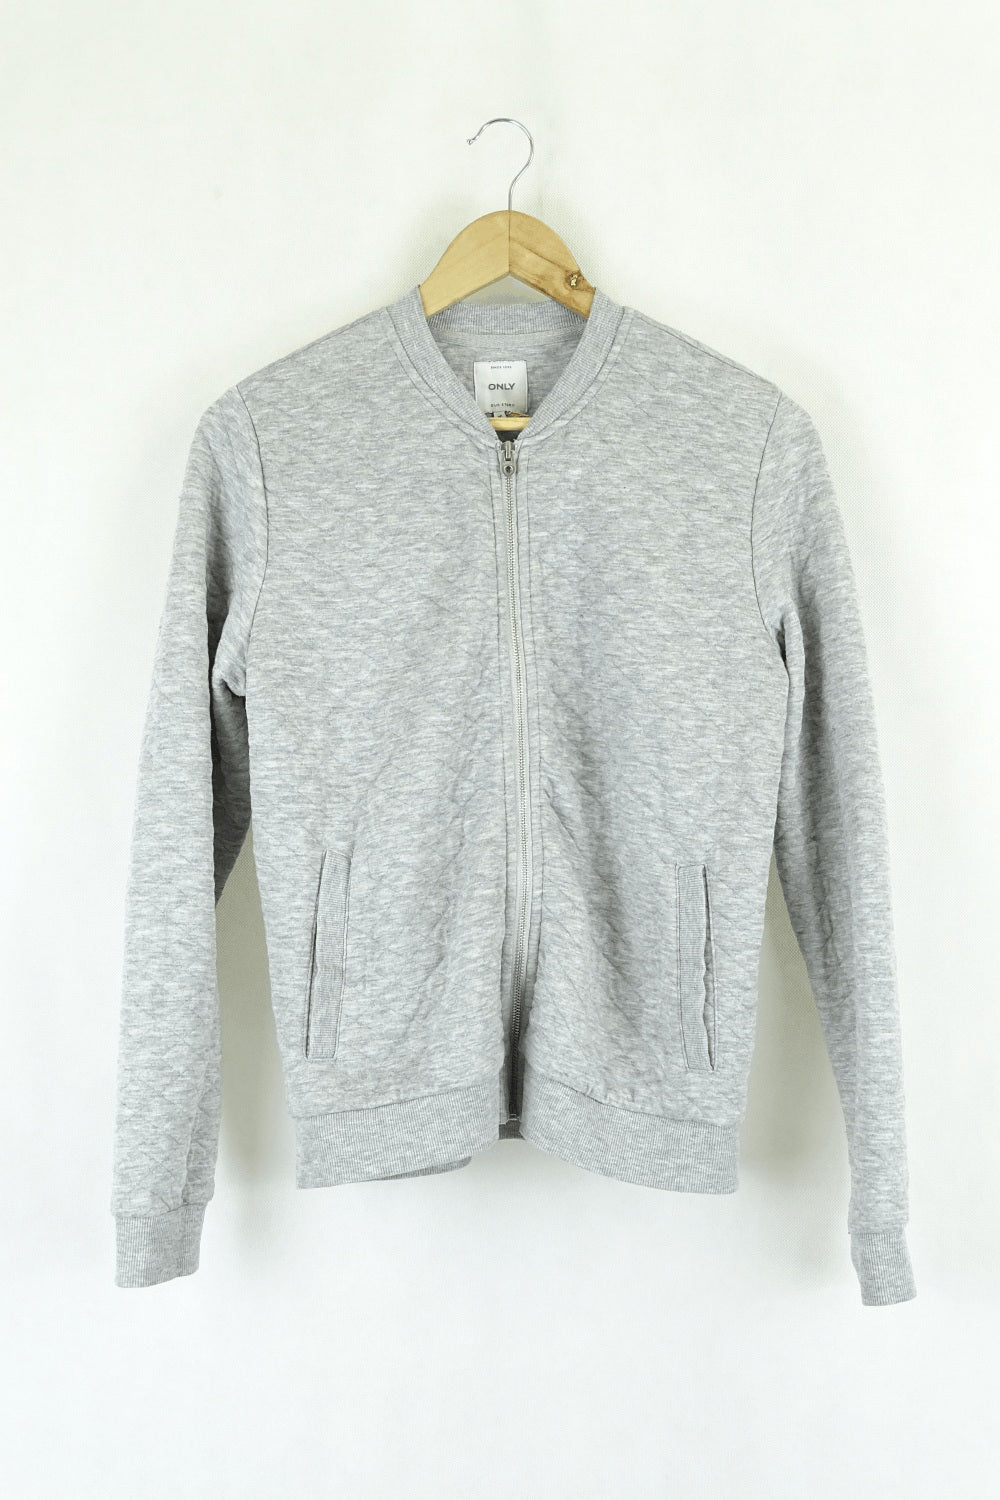 Only Grey Jacket M